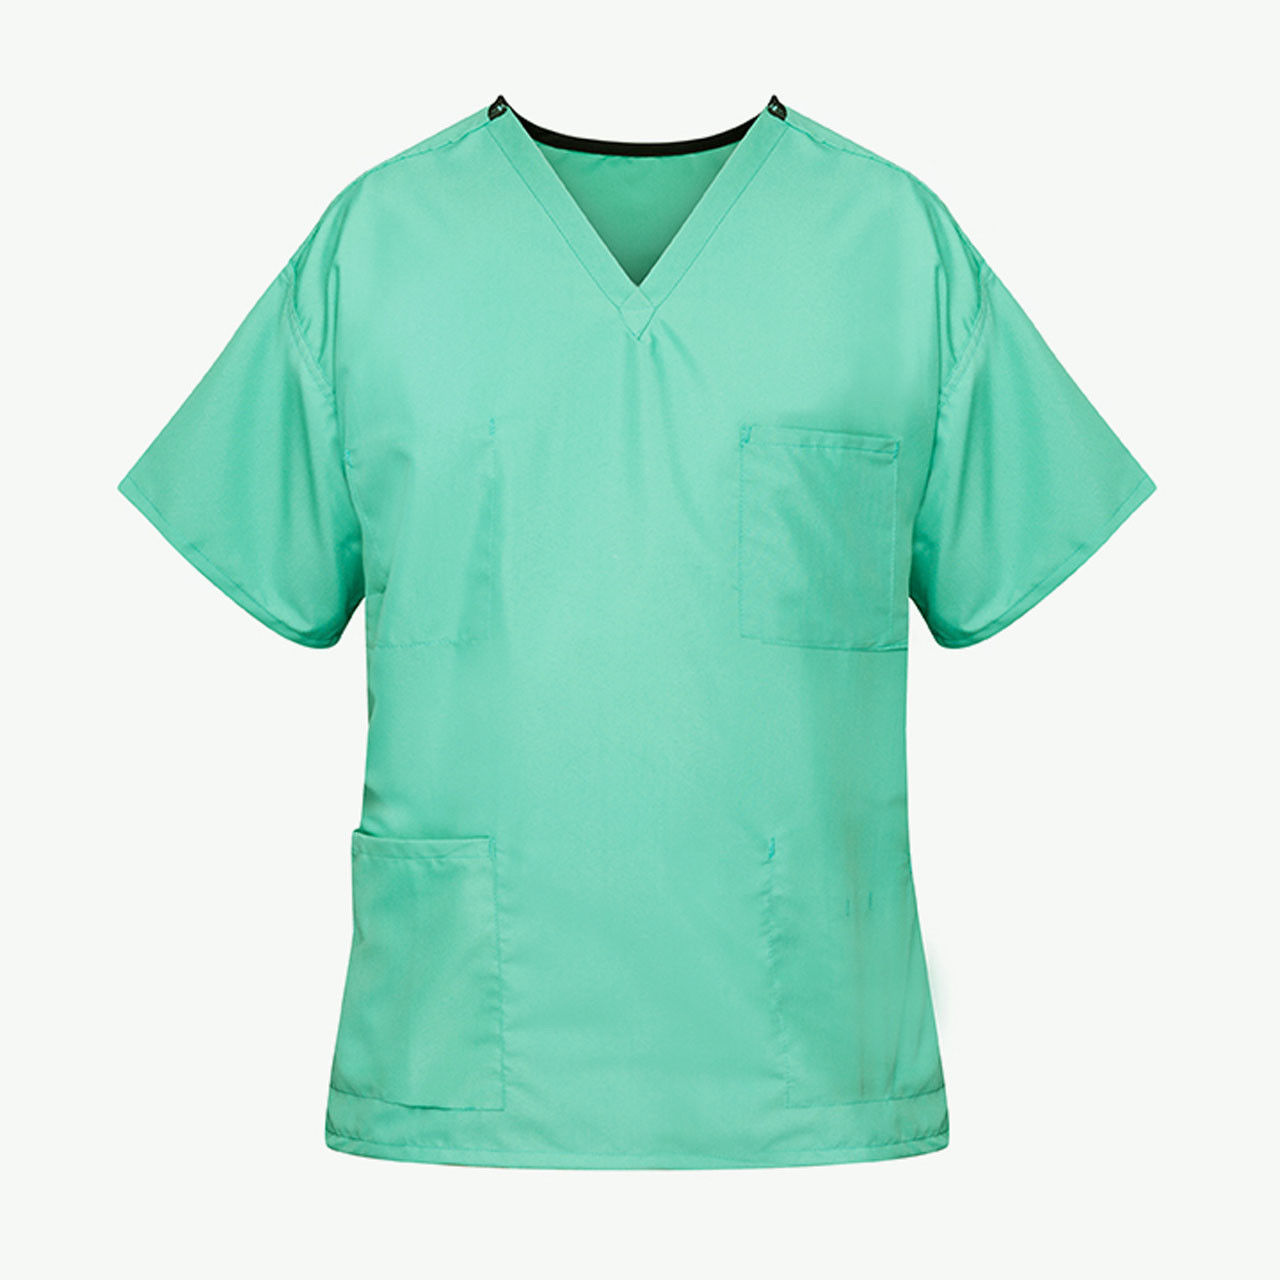 Are there jade green scrub pants to match the Unisex Reversible Scrub Top?